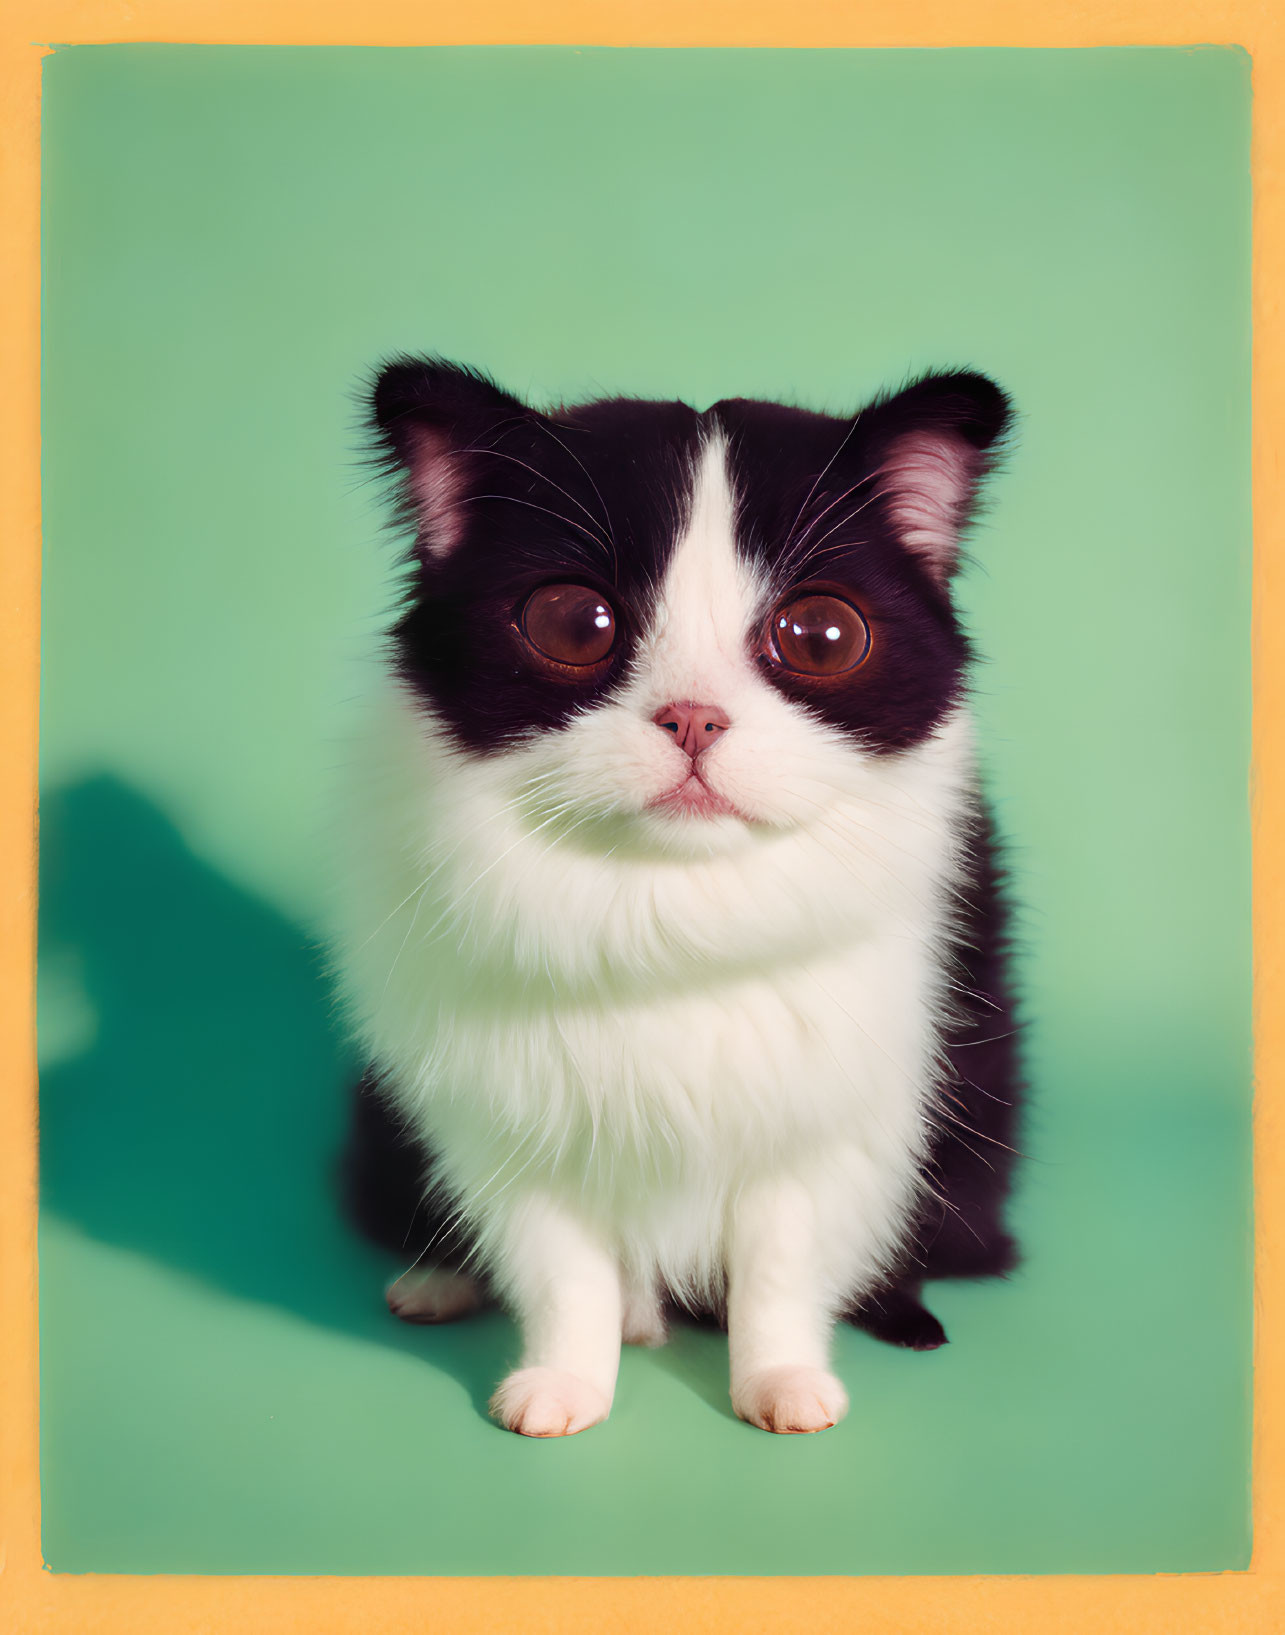 Black and white cat with large, striking eyes against green background